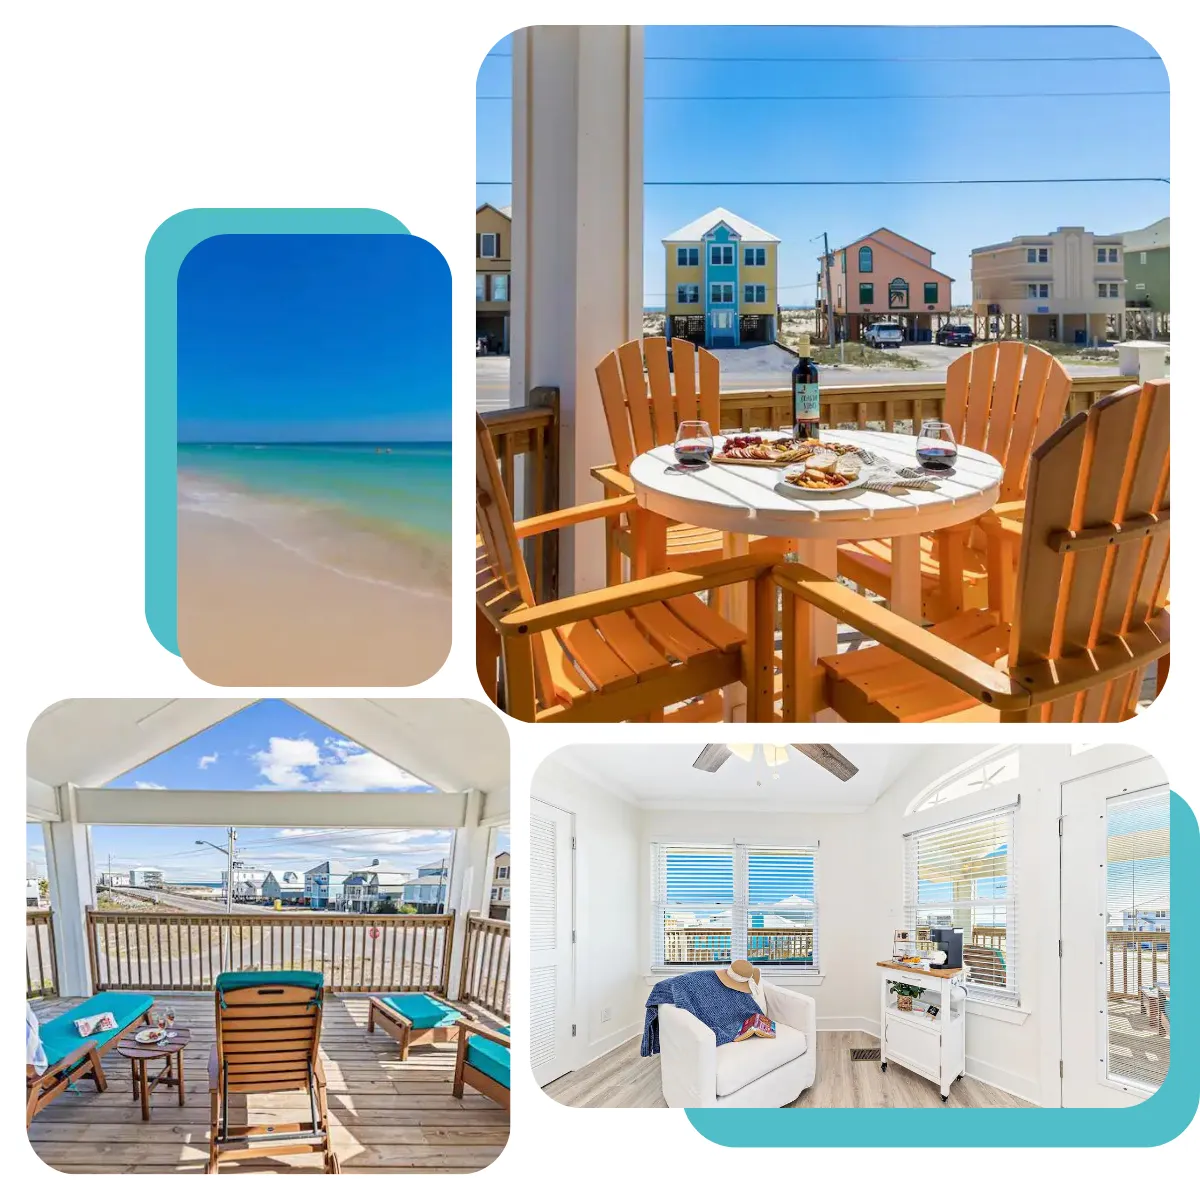 Dune Just Fine: Relax on private patios, dine outdoors, and enjoy beach activities in this coastal paradise with spacious decks and a yard for games and BBQs.